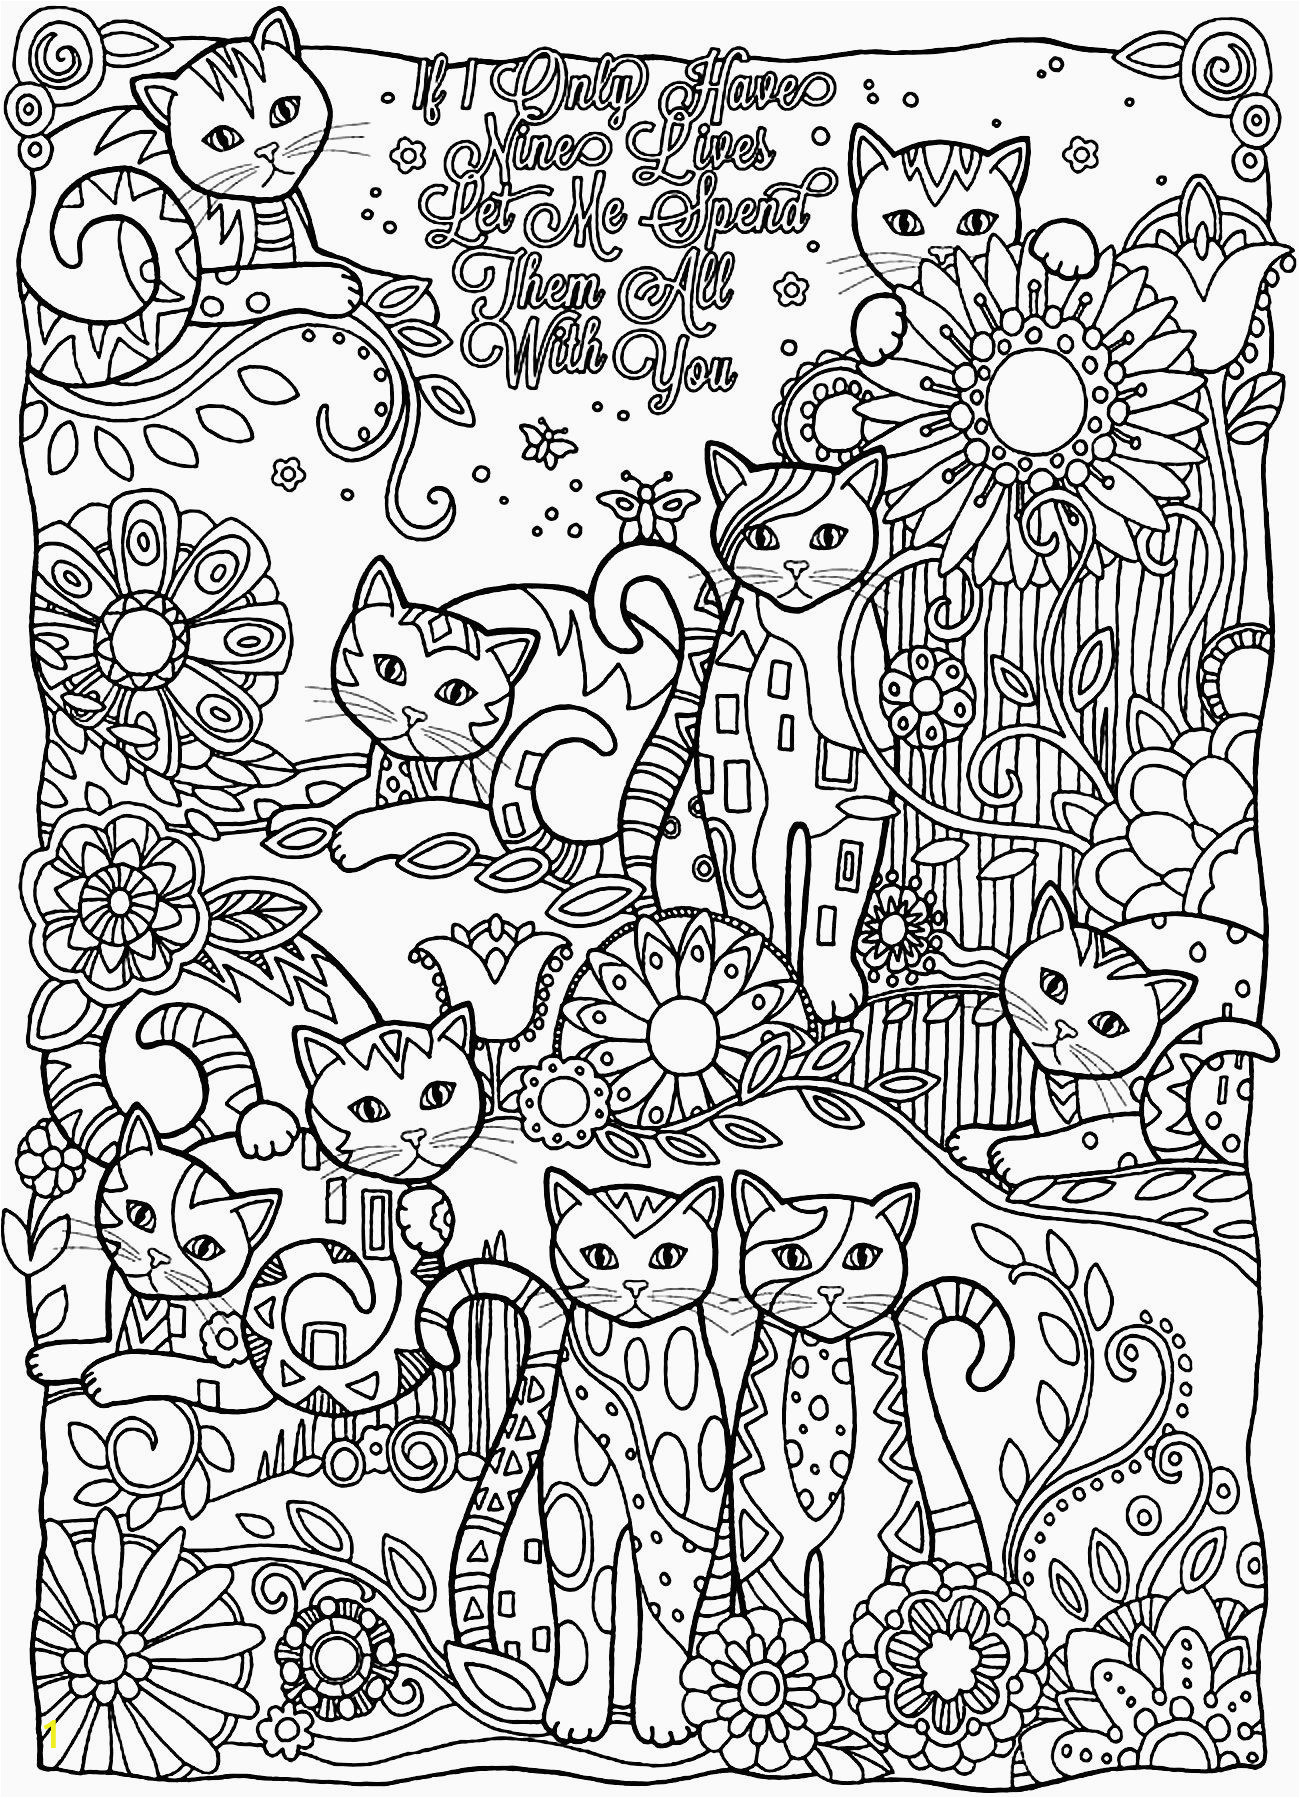 Printable Christmas Coloring Pages for Adults Christmas Coloring Printable Pages